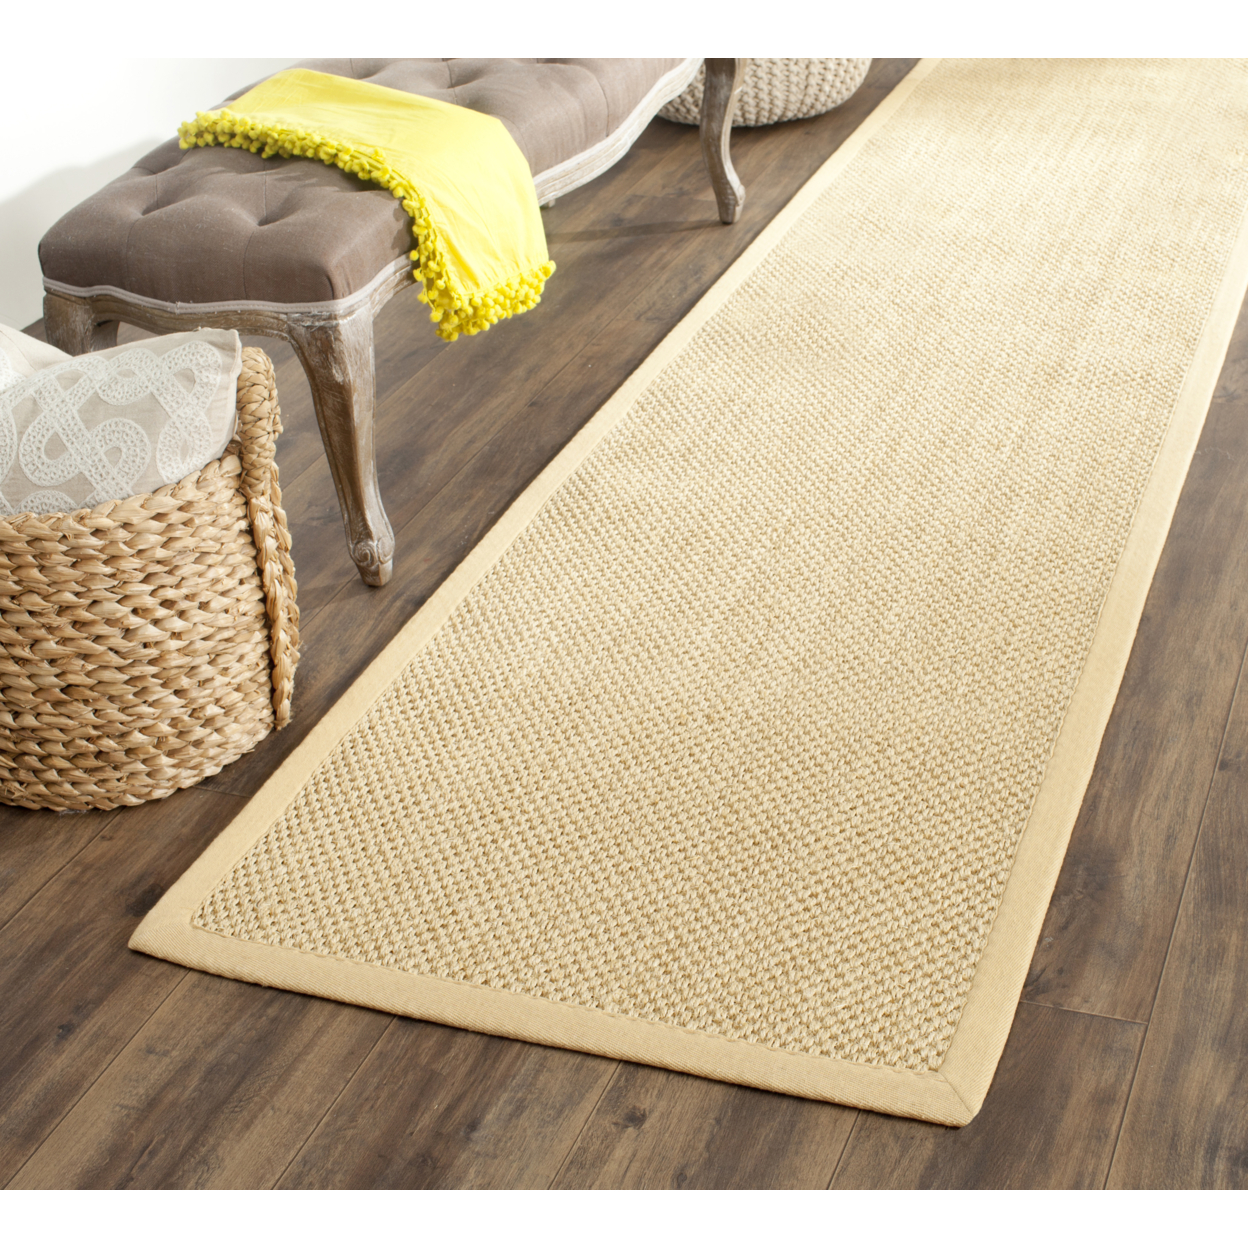 SAFAVIEH Natural Fiber Collection NF443A Maize/Wheat Rug - 10' Square